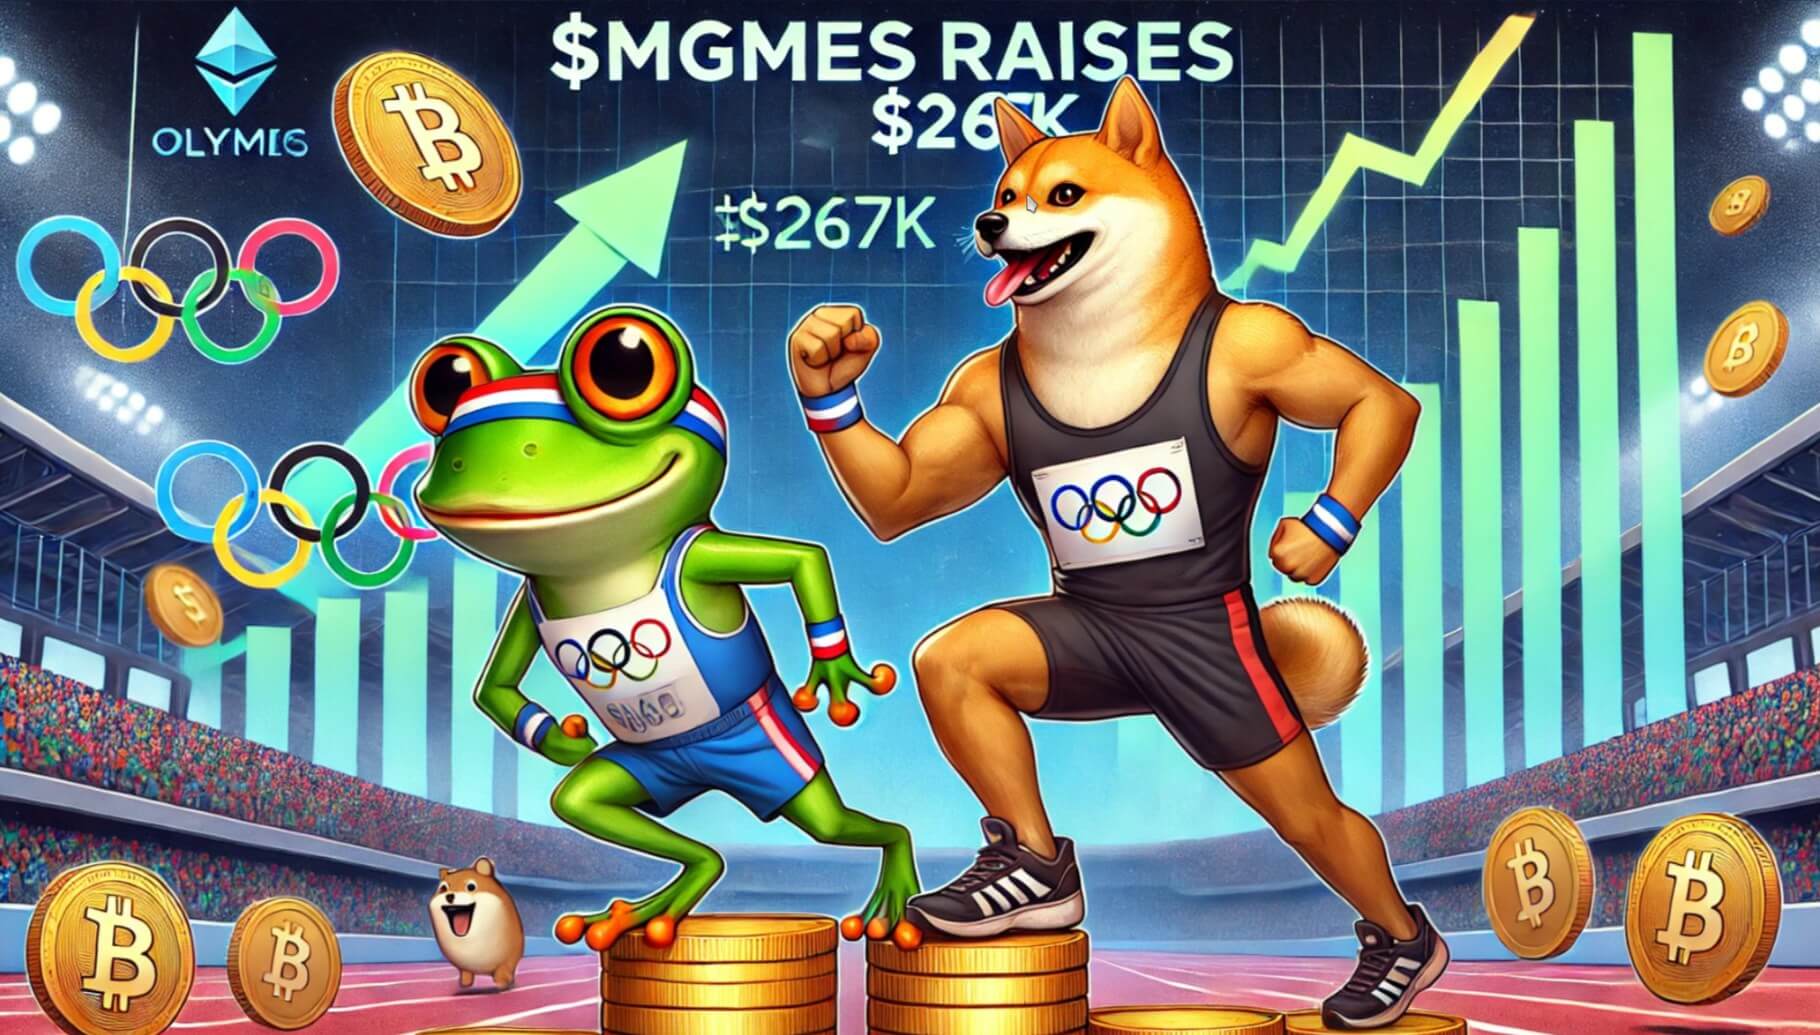 Olympic Games Countdown Begins – $MGMES Raises $267K – The TechLead